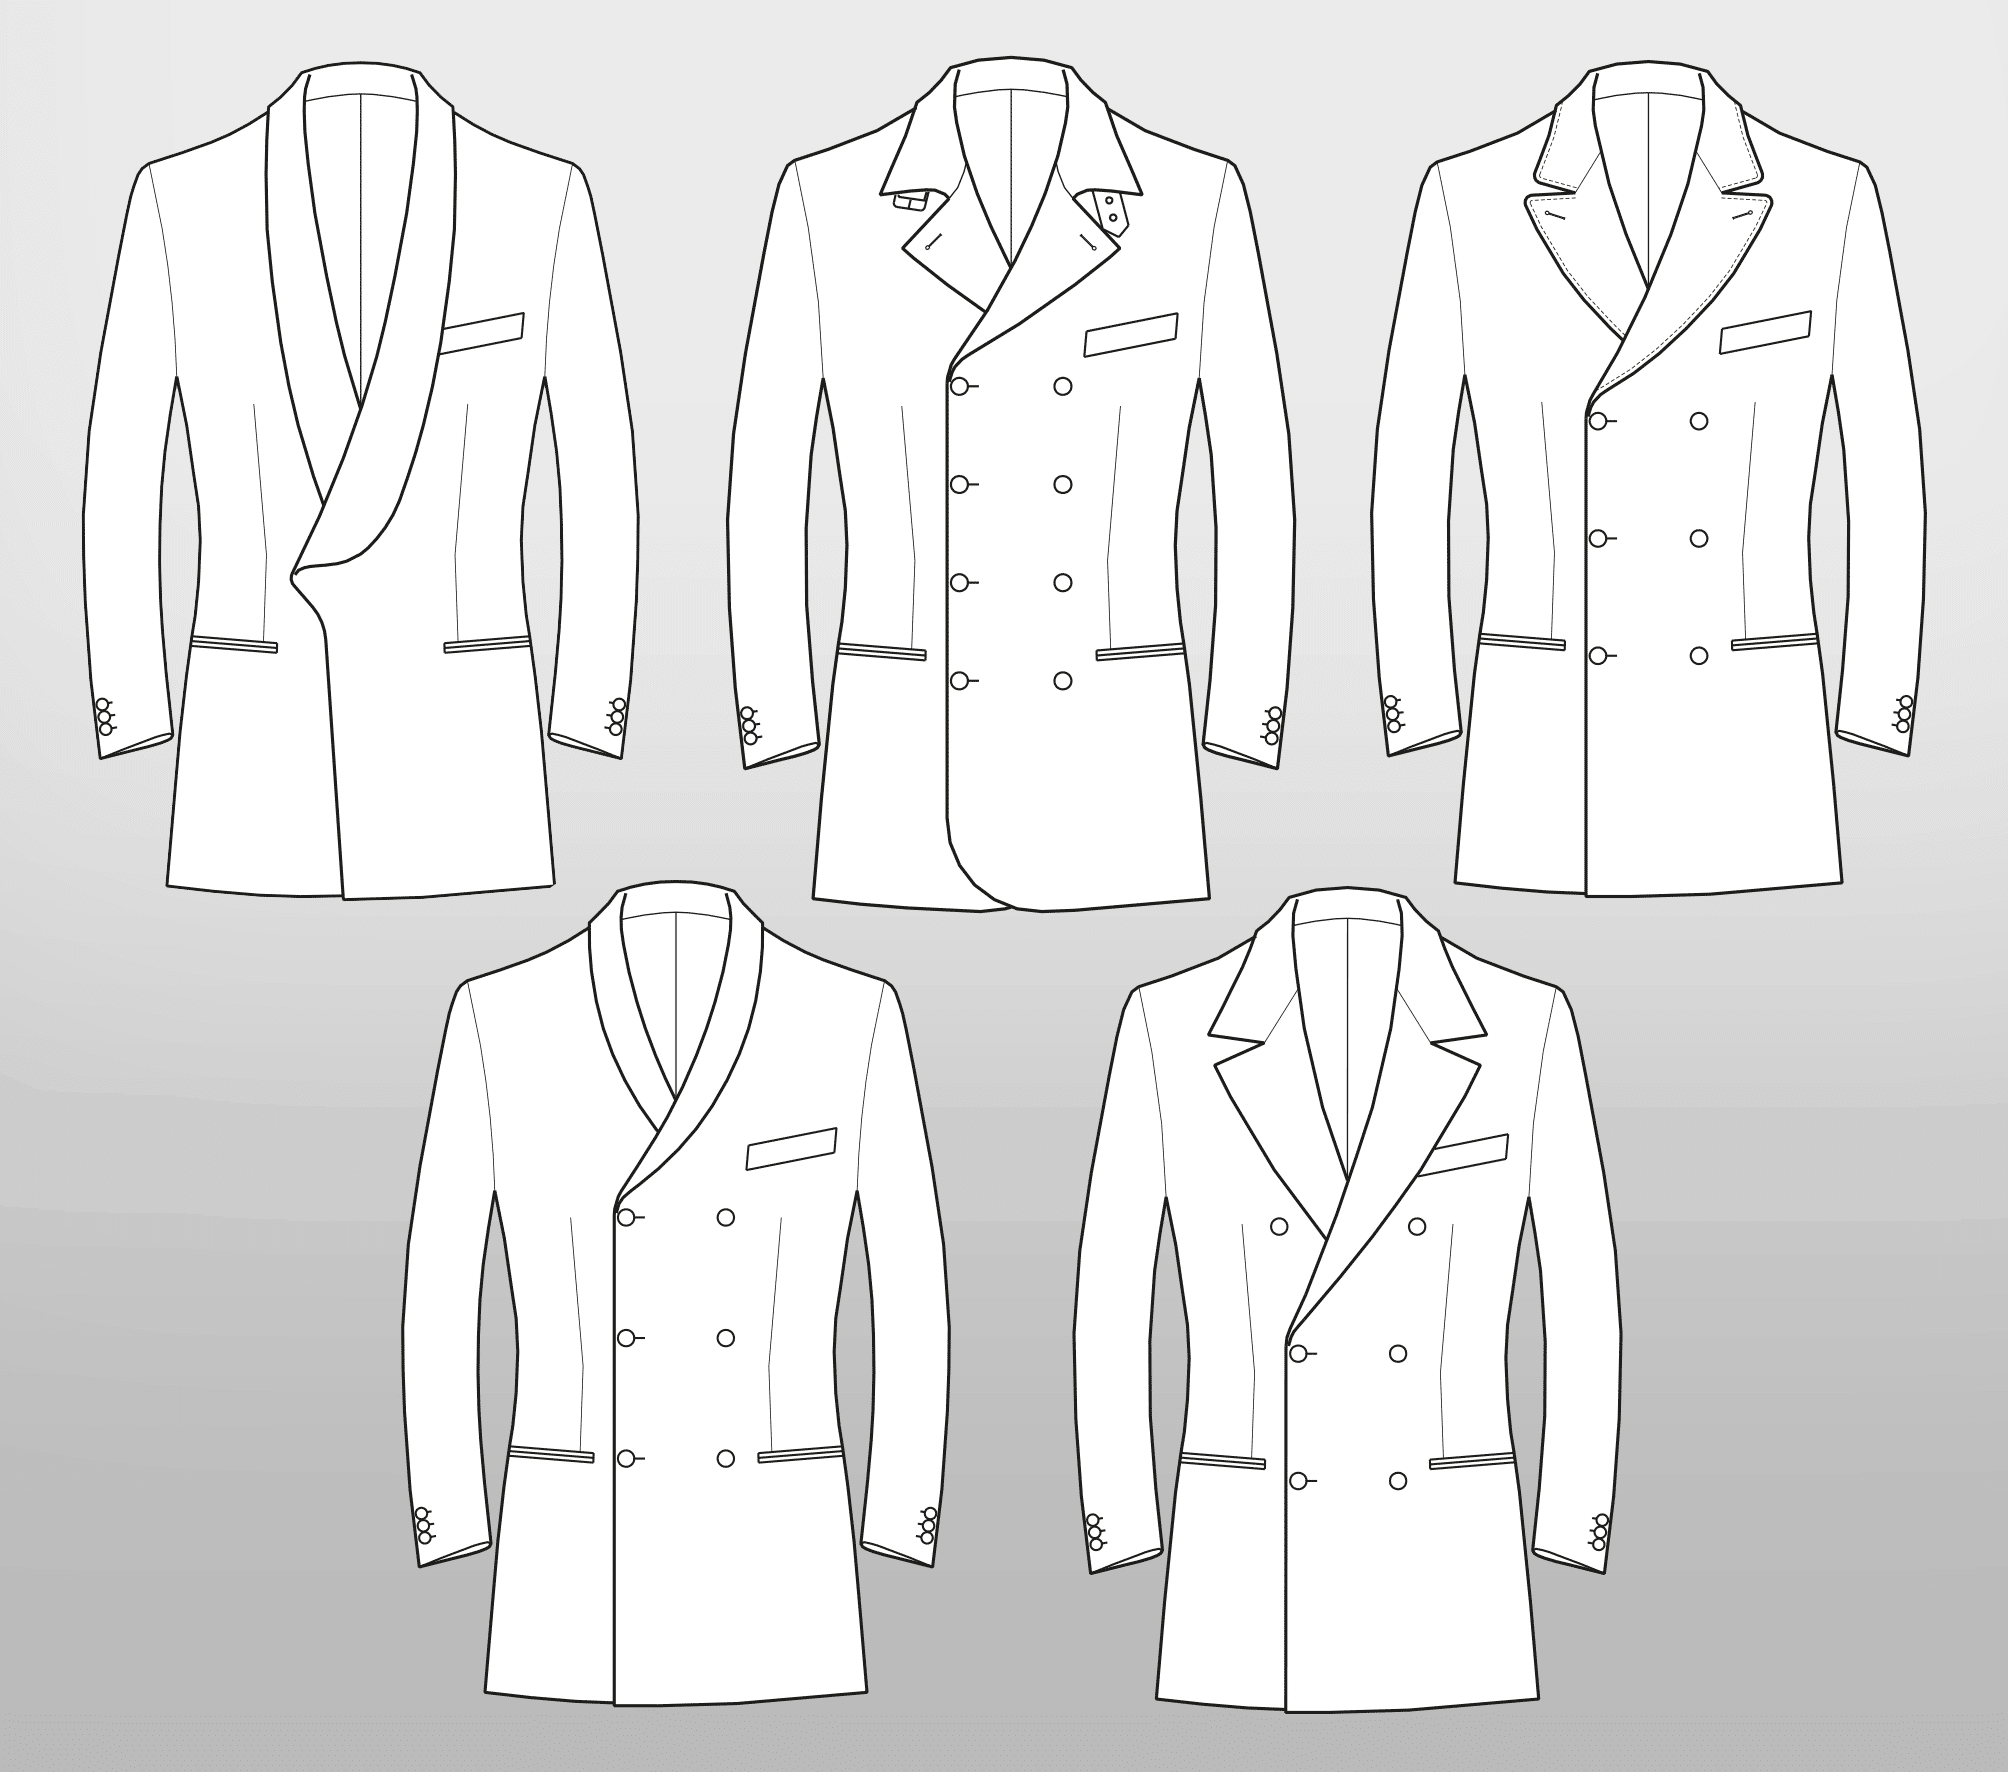 Curved Peak Lapel 3x6 Double Breasted Jacket